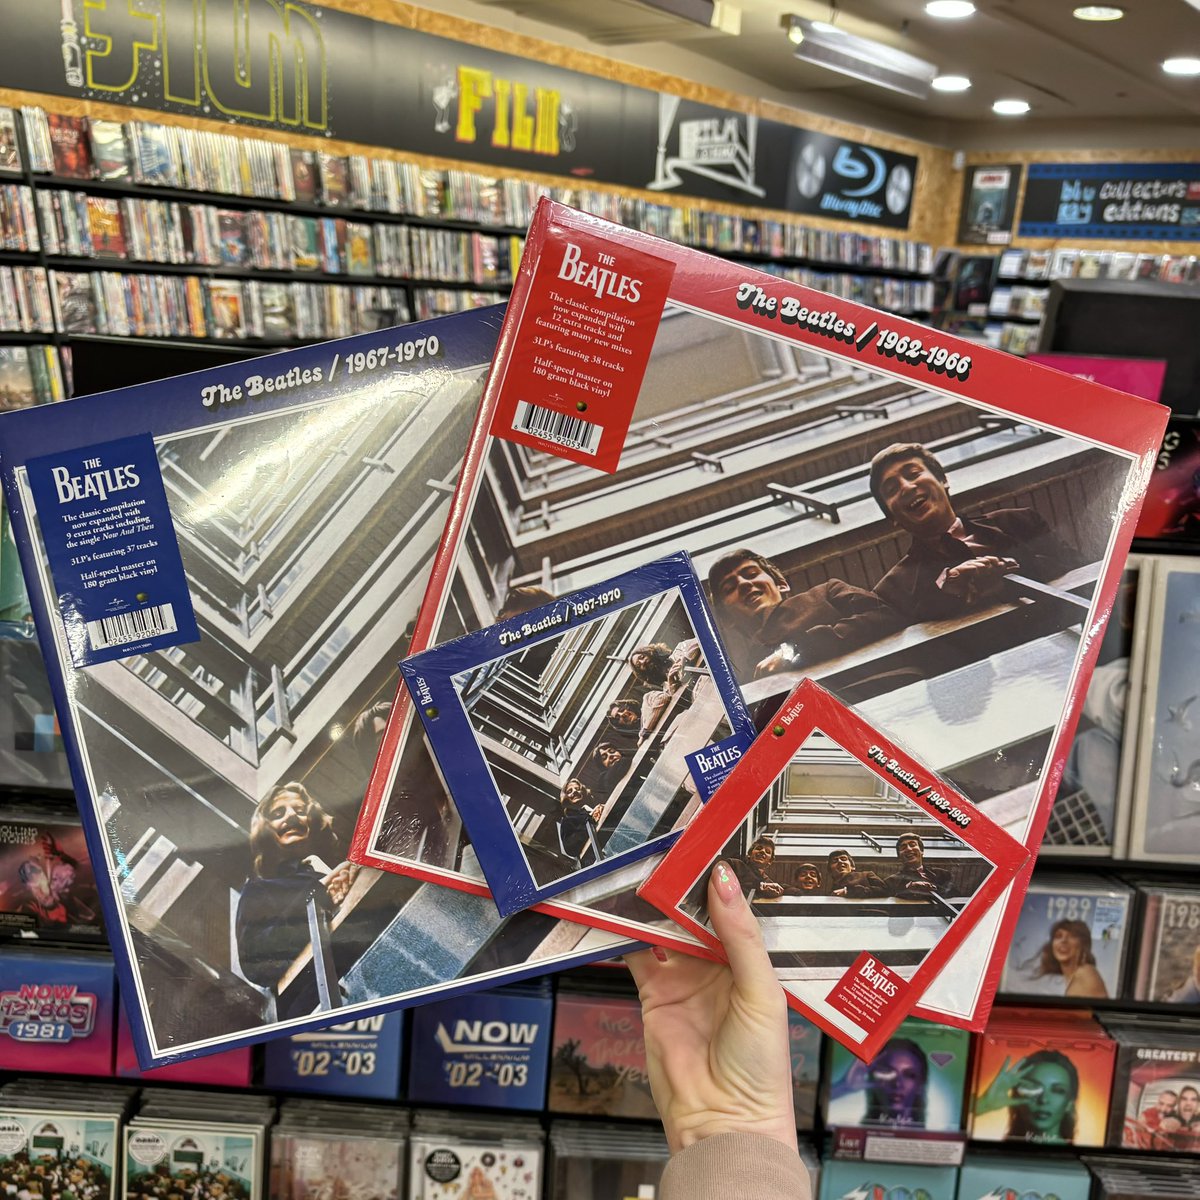 🍏 THE BEATLES 🍏 Reissues of #TheBeatles Red ❤️ and Blue 💙 compilations out now on Remastered CD and LP ✨ Blue version includes Now & Then